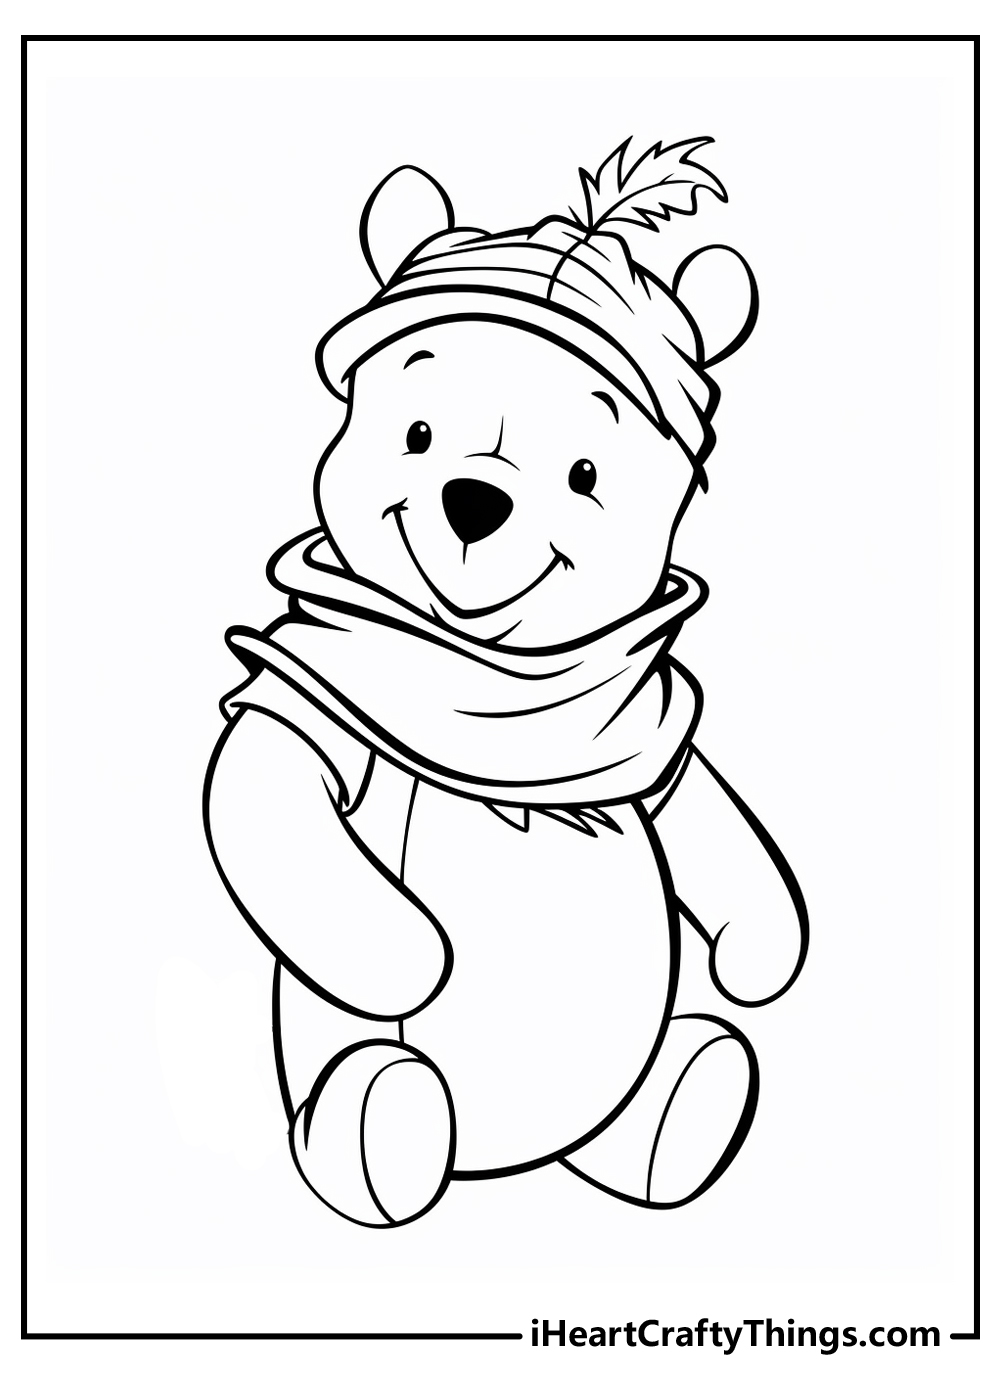 New Winnie the Pooh Coloring Sheet for Kids